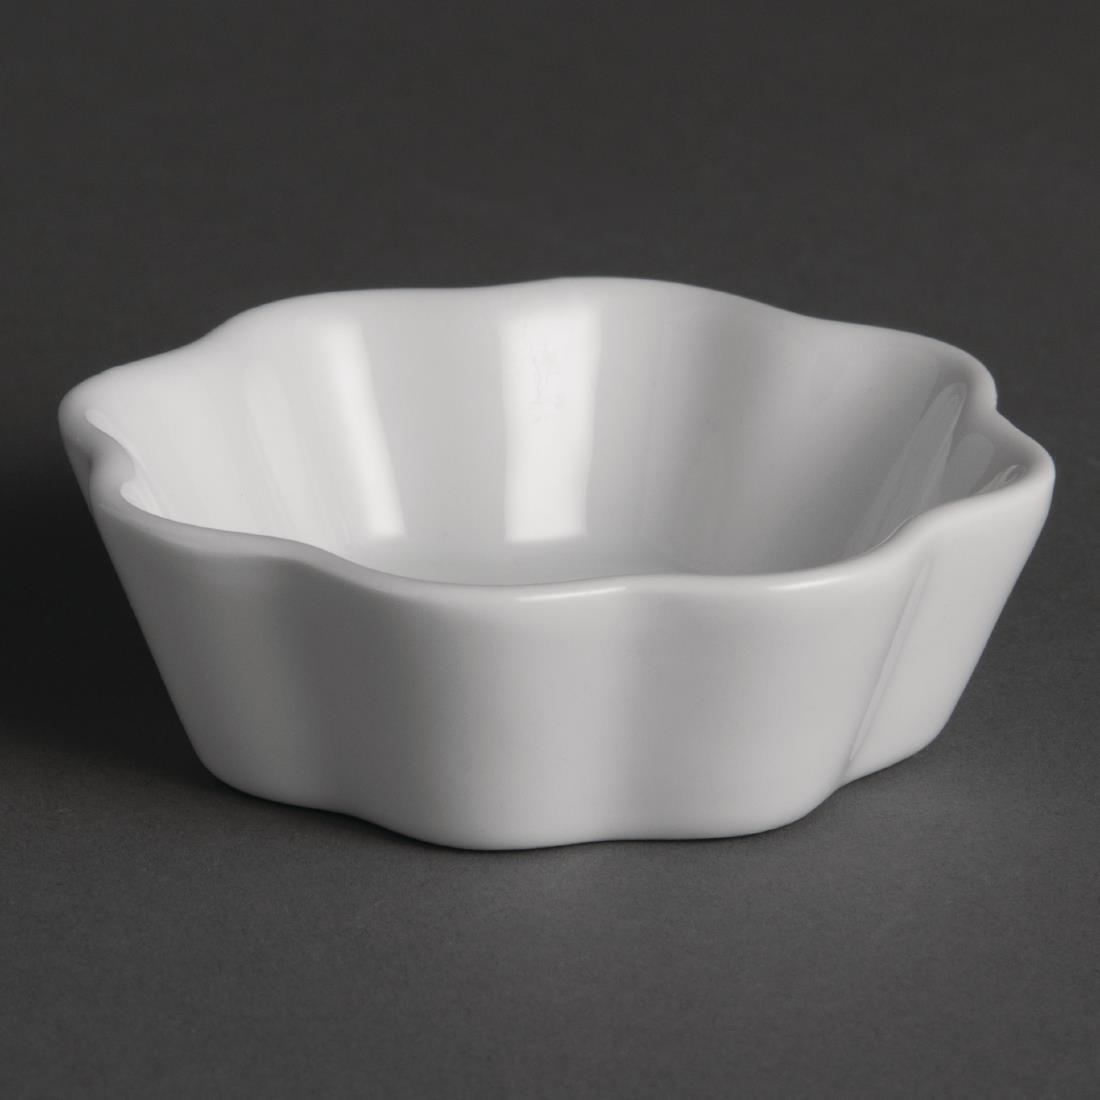 Olympia Octo Miniature Dishes 80mm - Case 12 - Y134 - 1